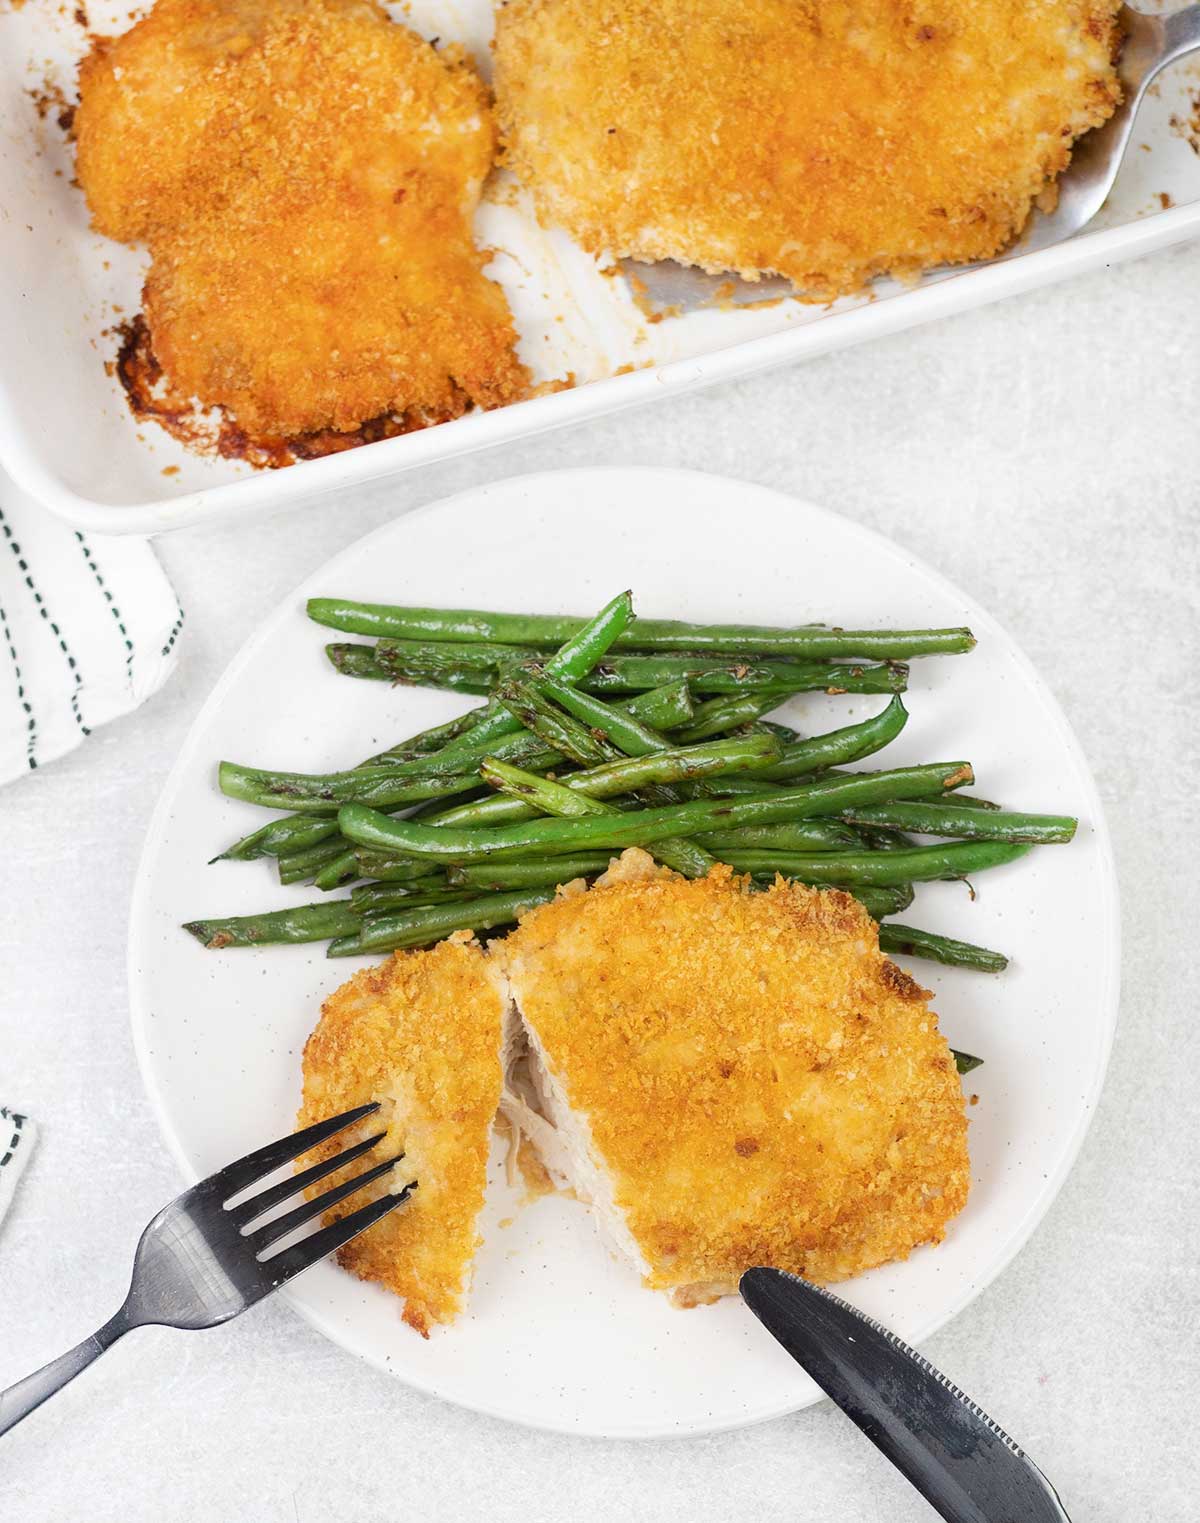 Baked Panko breaded chicken breast and some green beans.